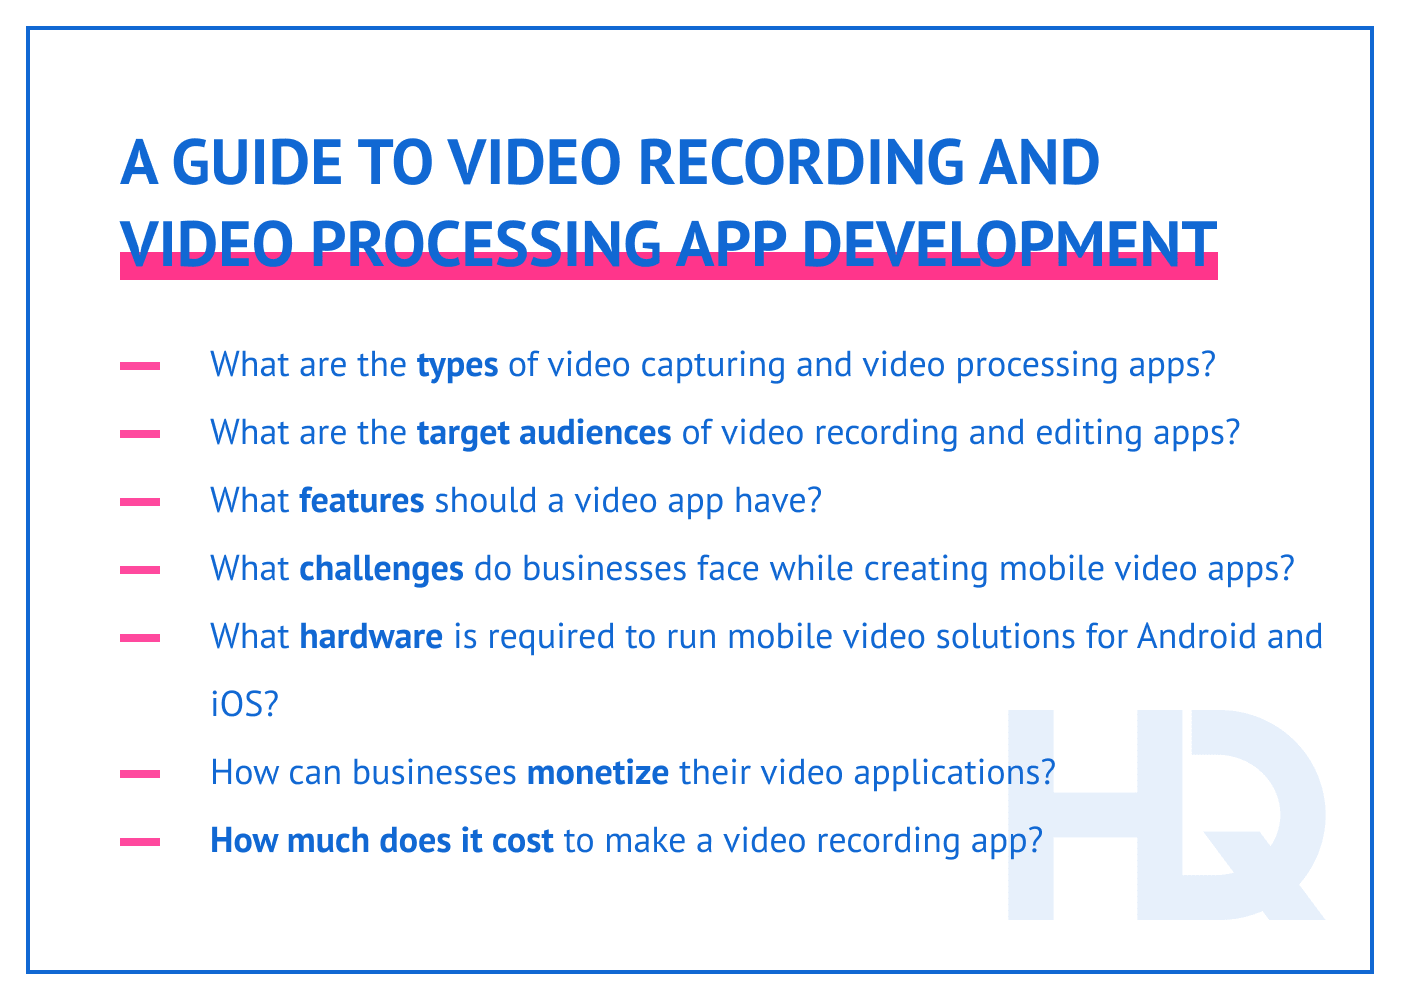 A guide to video recording and video processing app development: article contents.